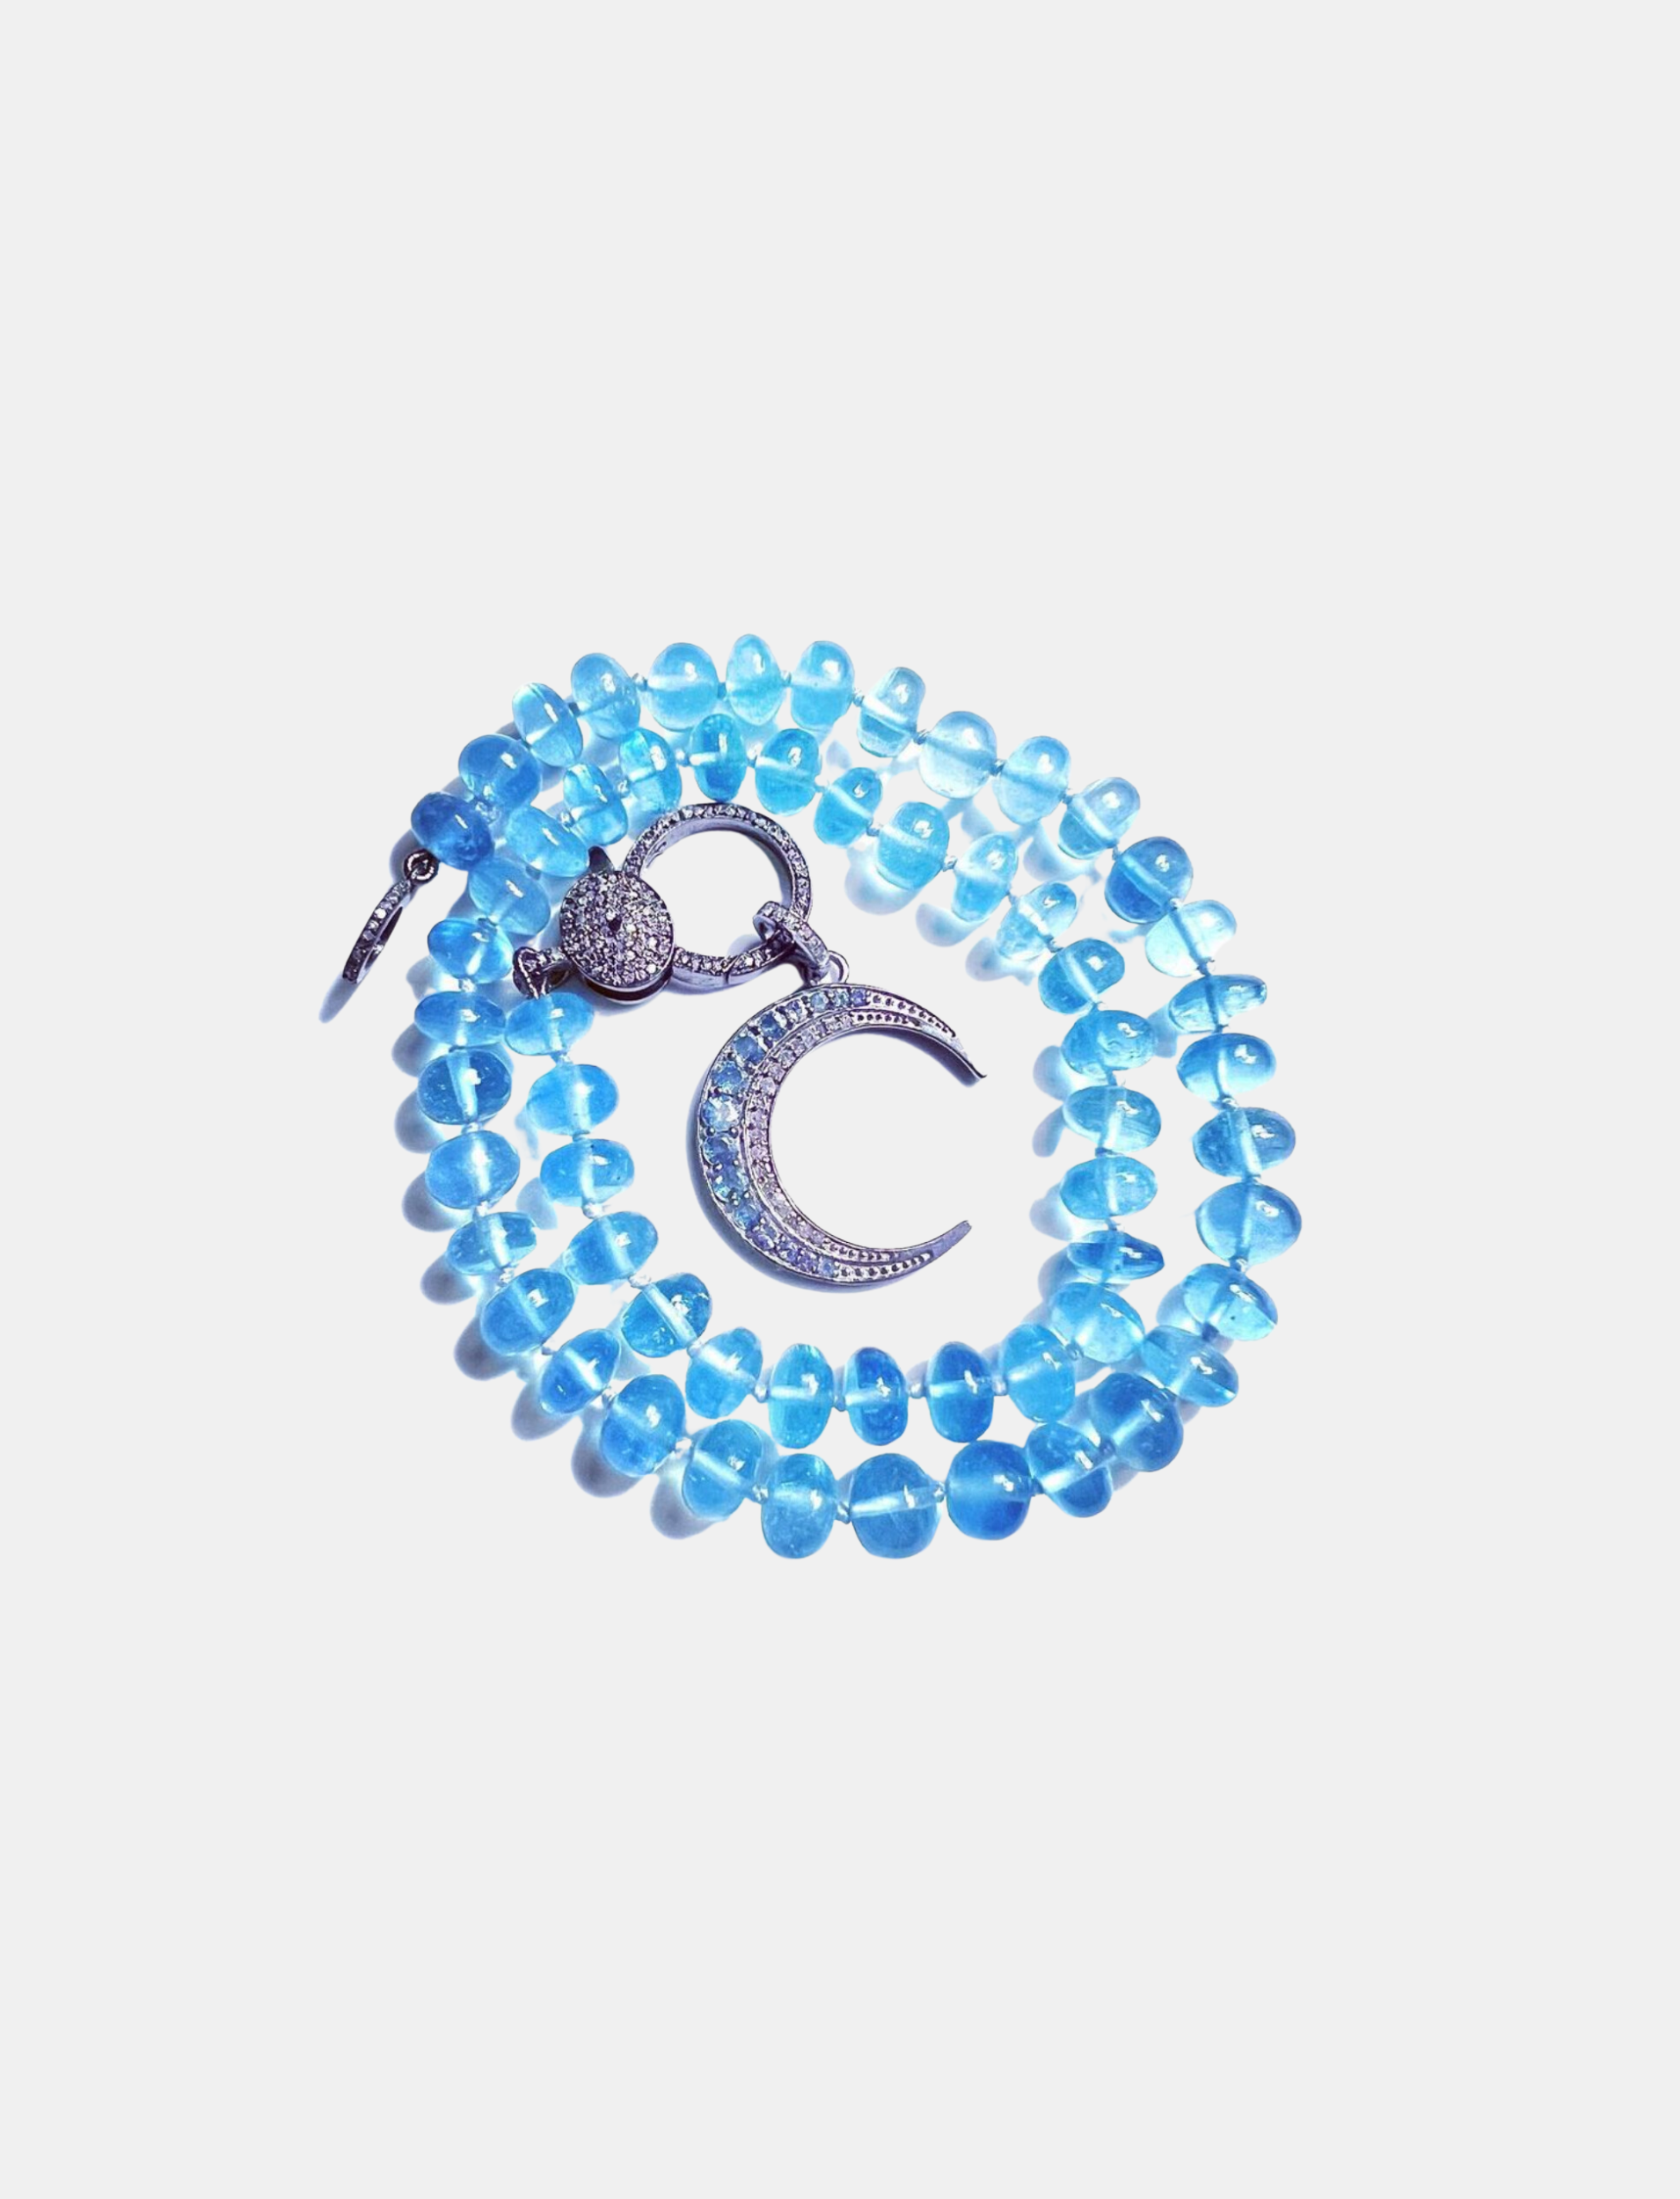 Aquamarine Knotted Necklace with Moon Pendant